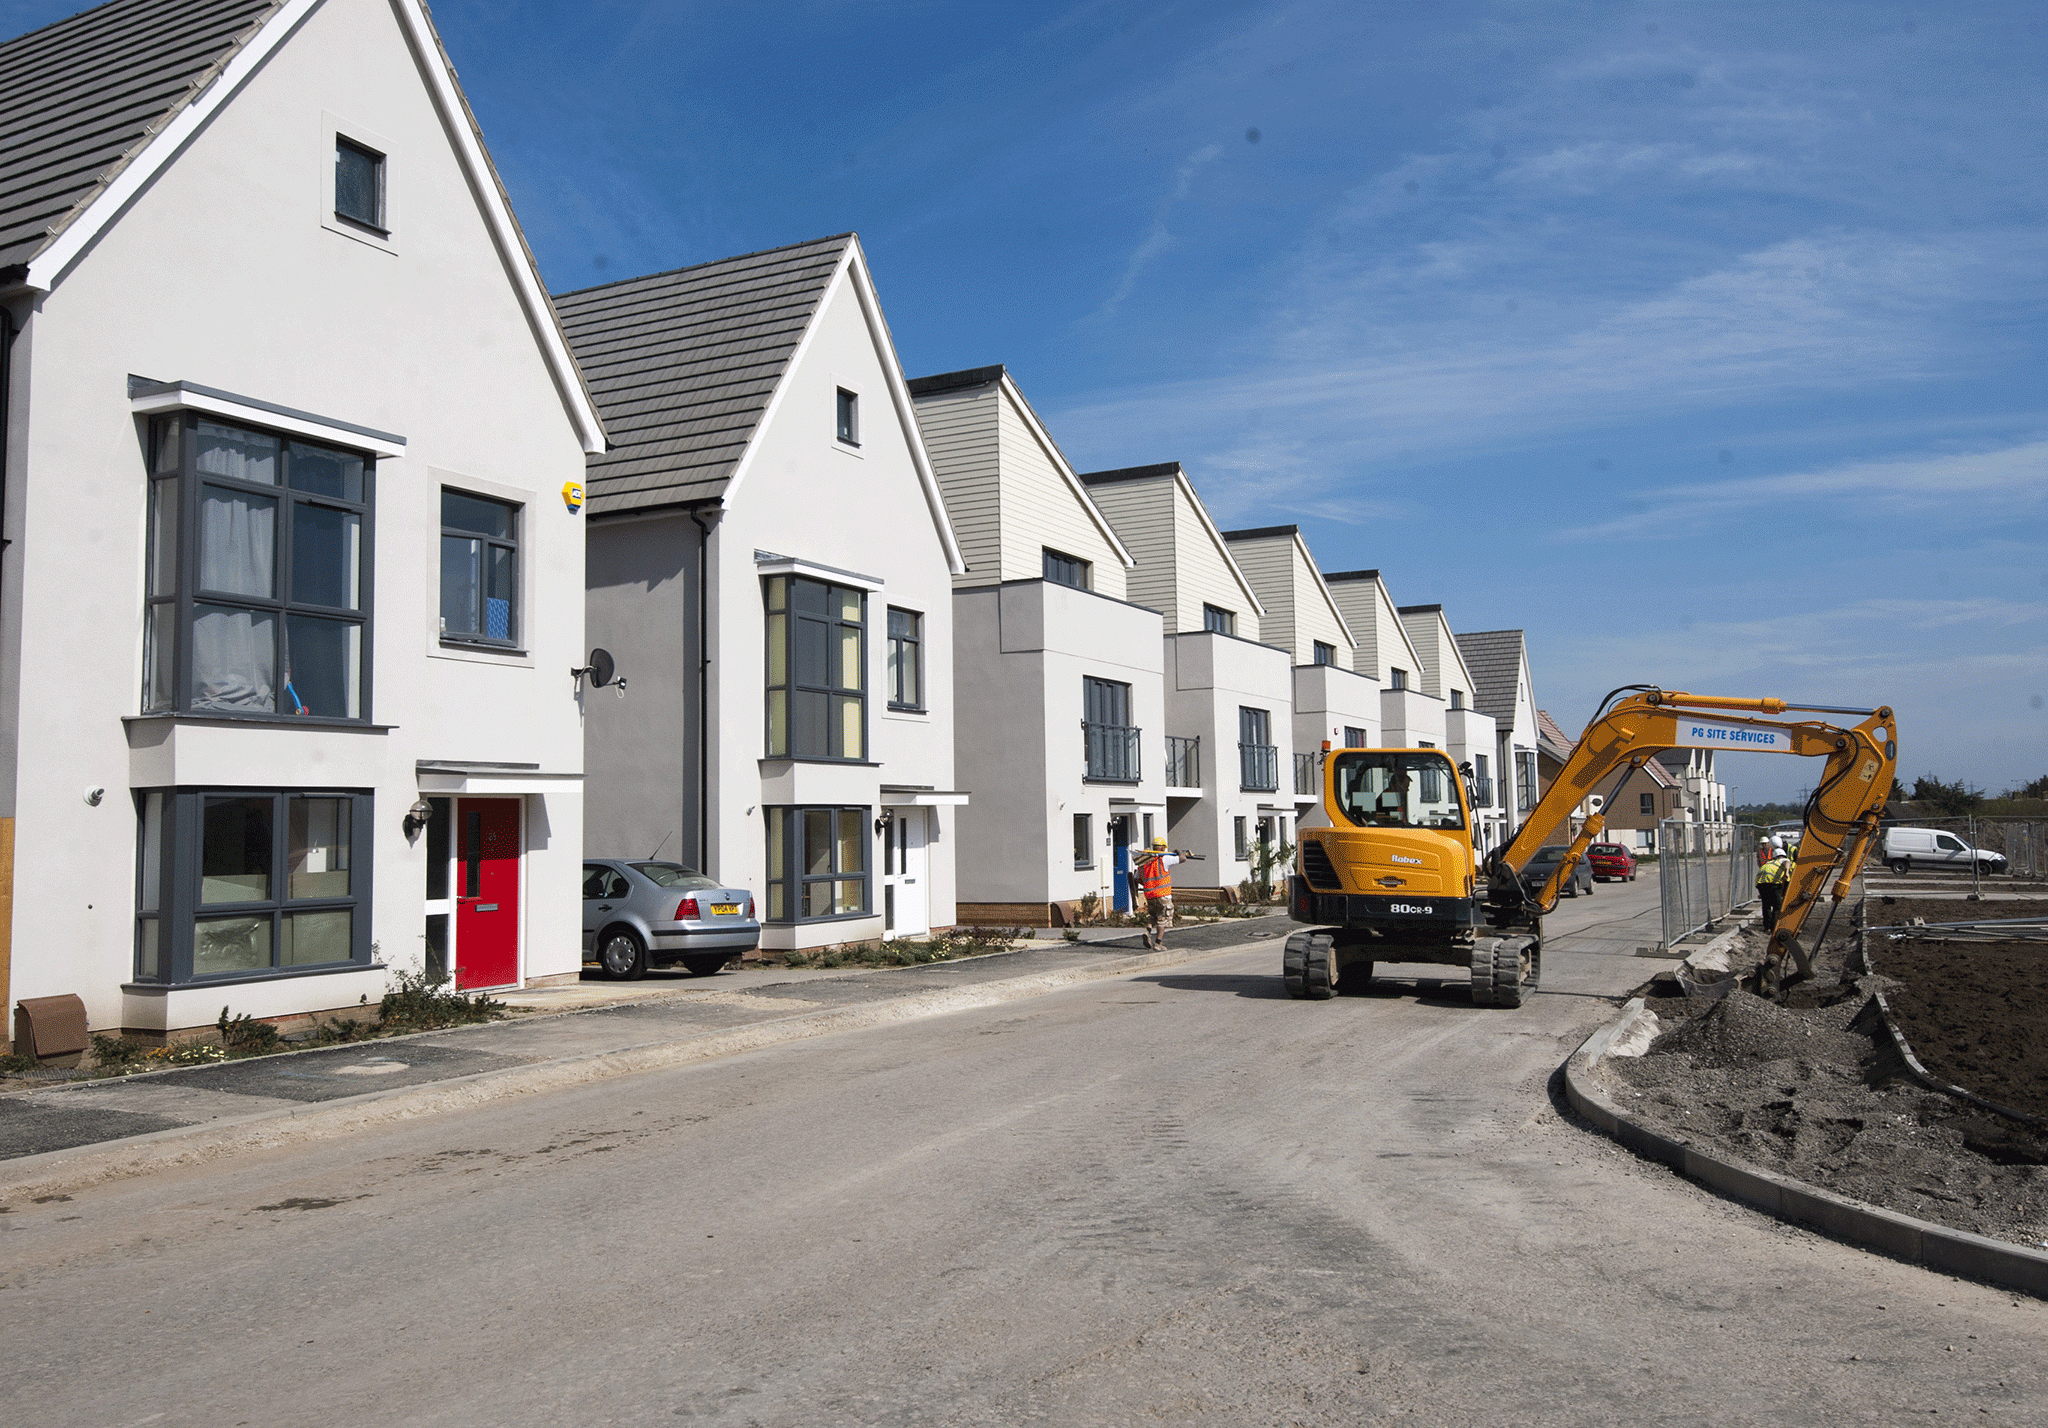 Persimmon Homes relies on first time buyers 